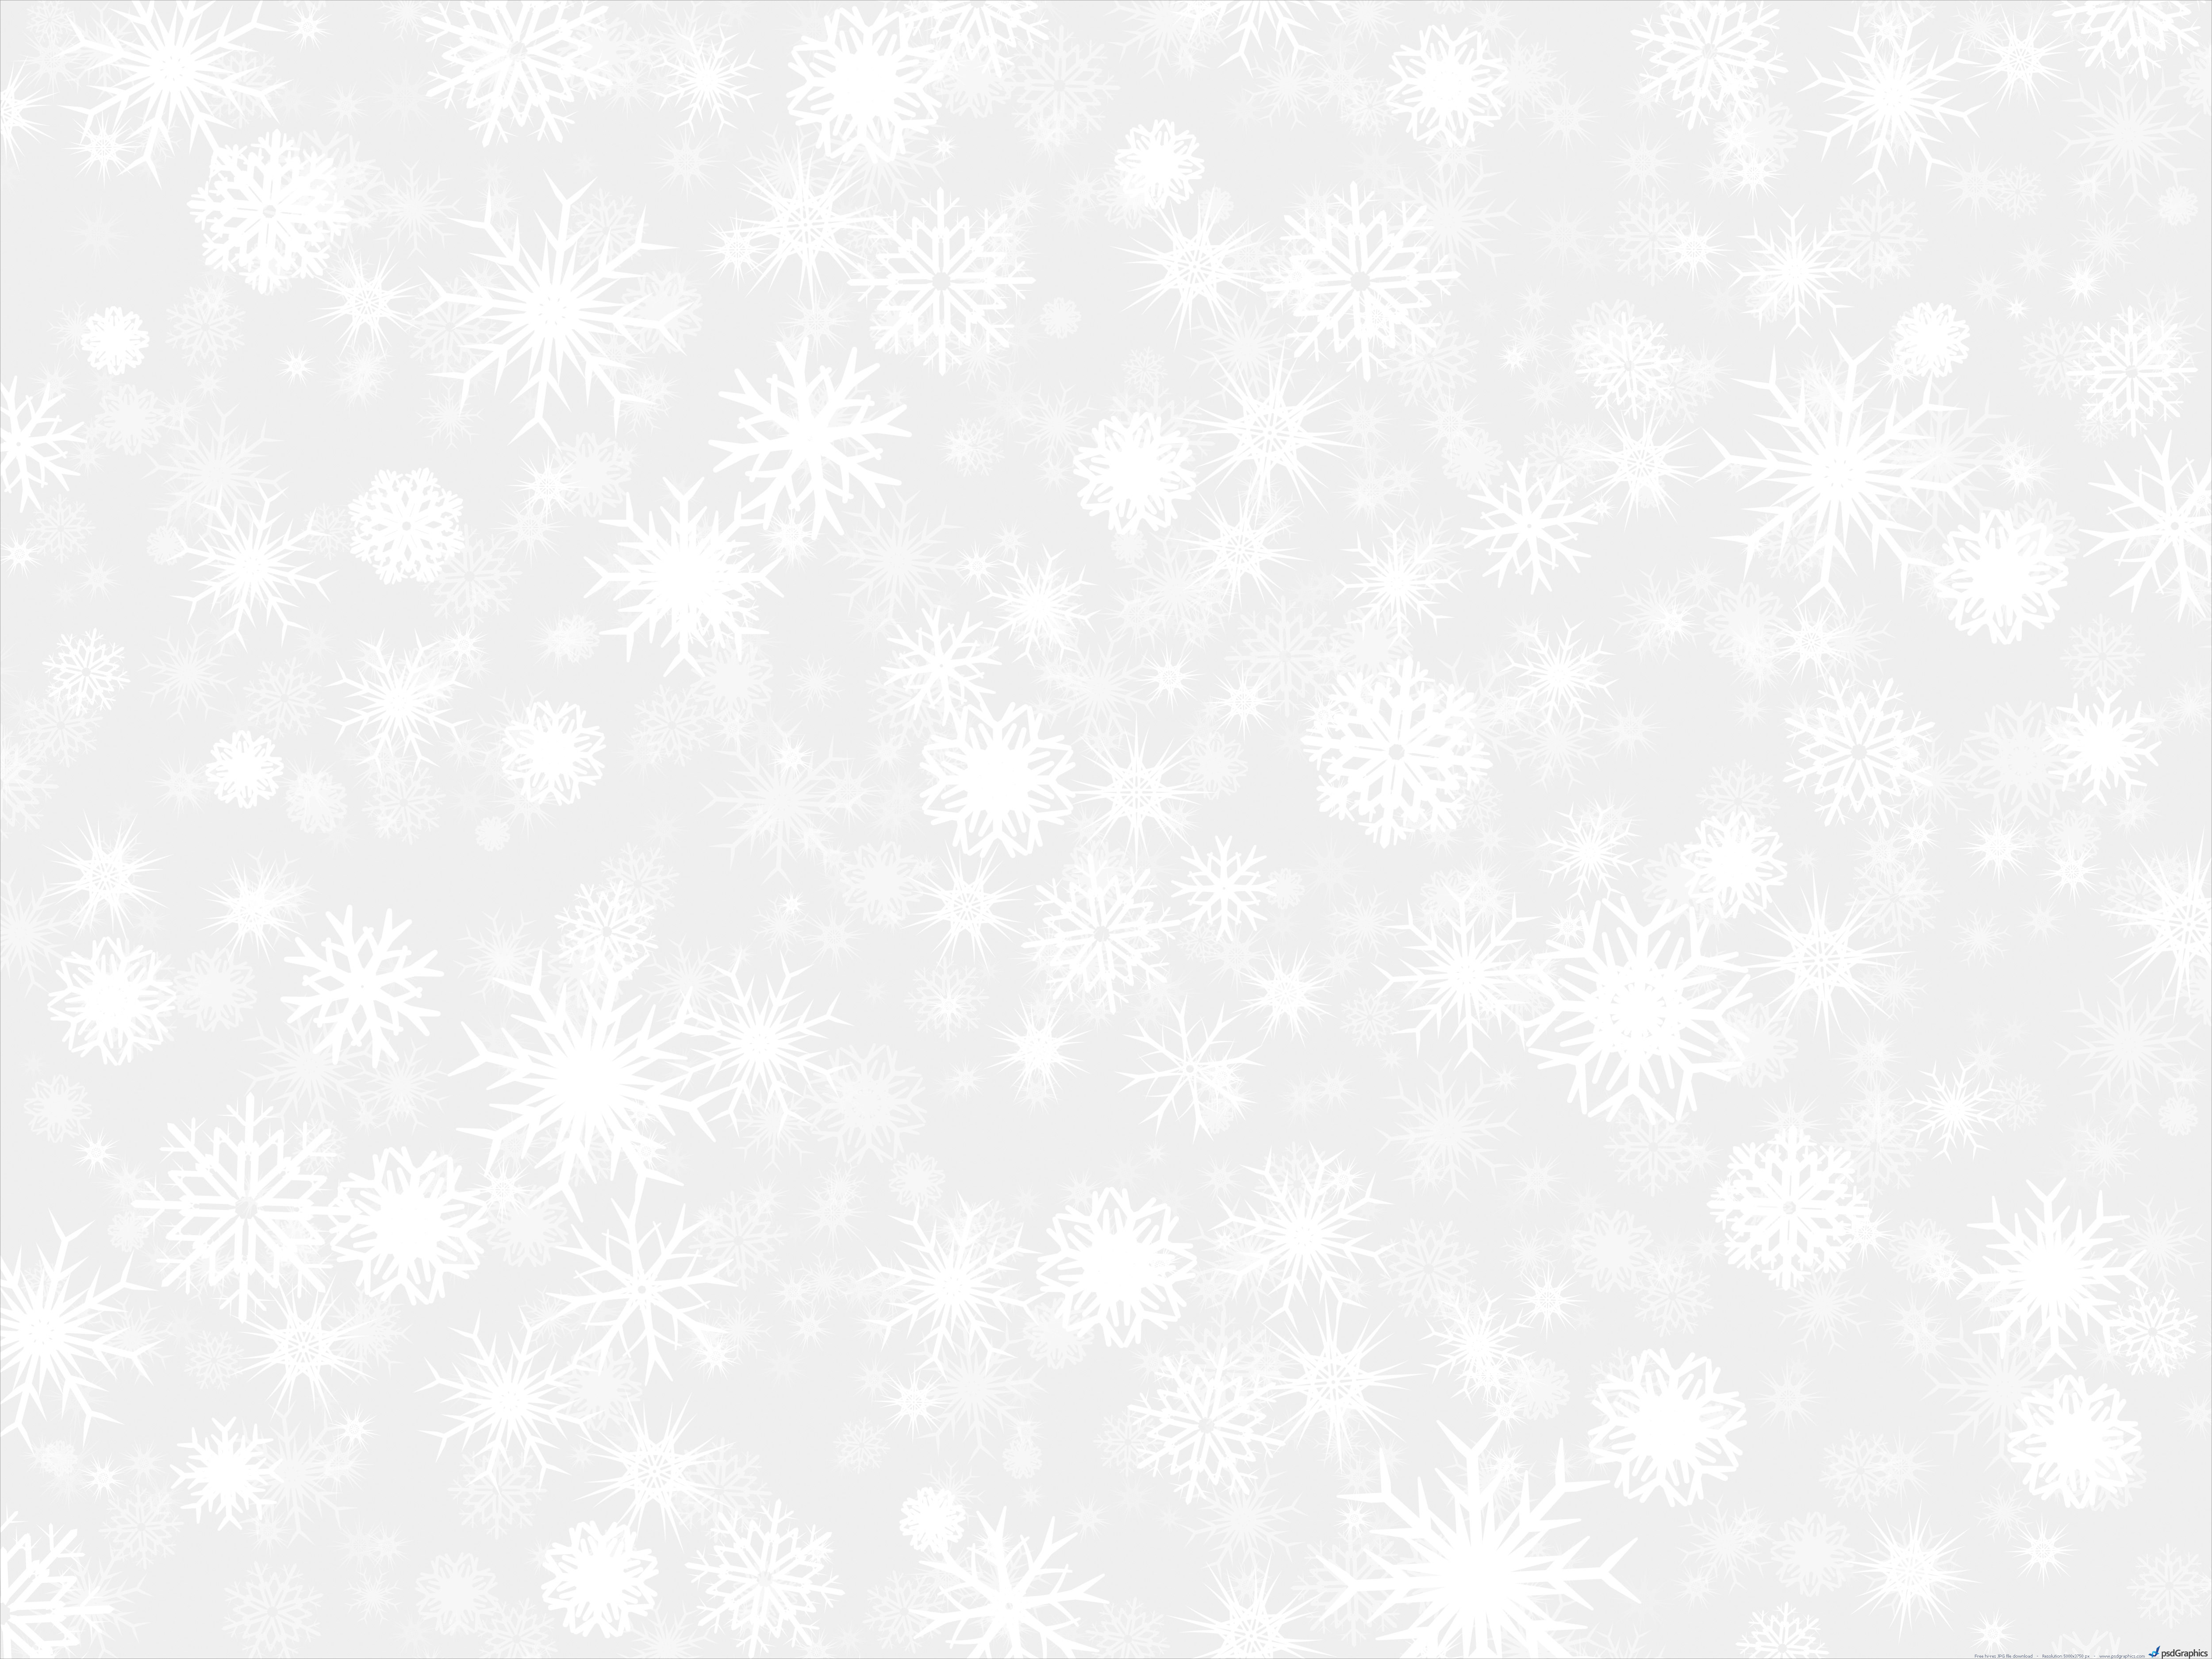 Hq Snow Background Wallpaper Image Creatives